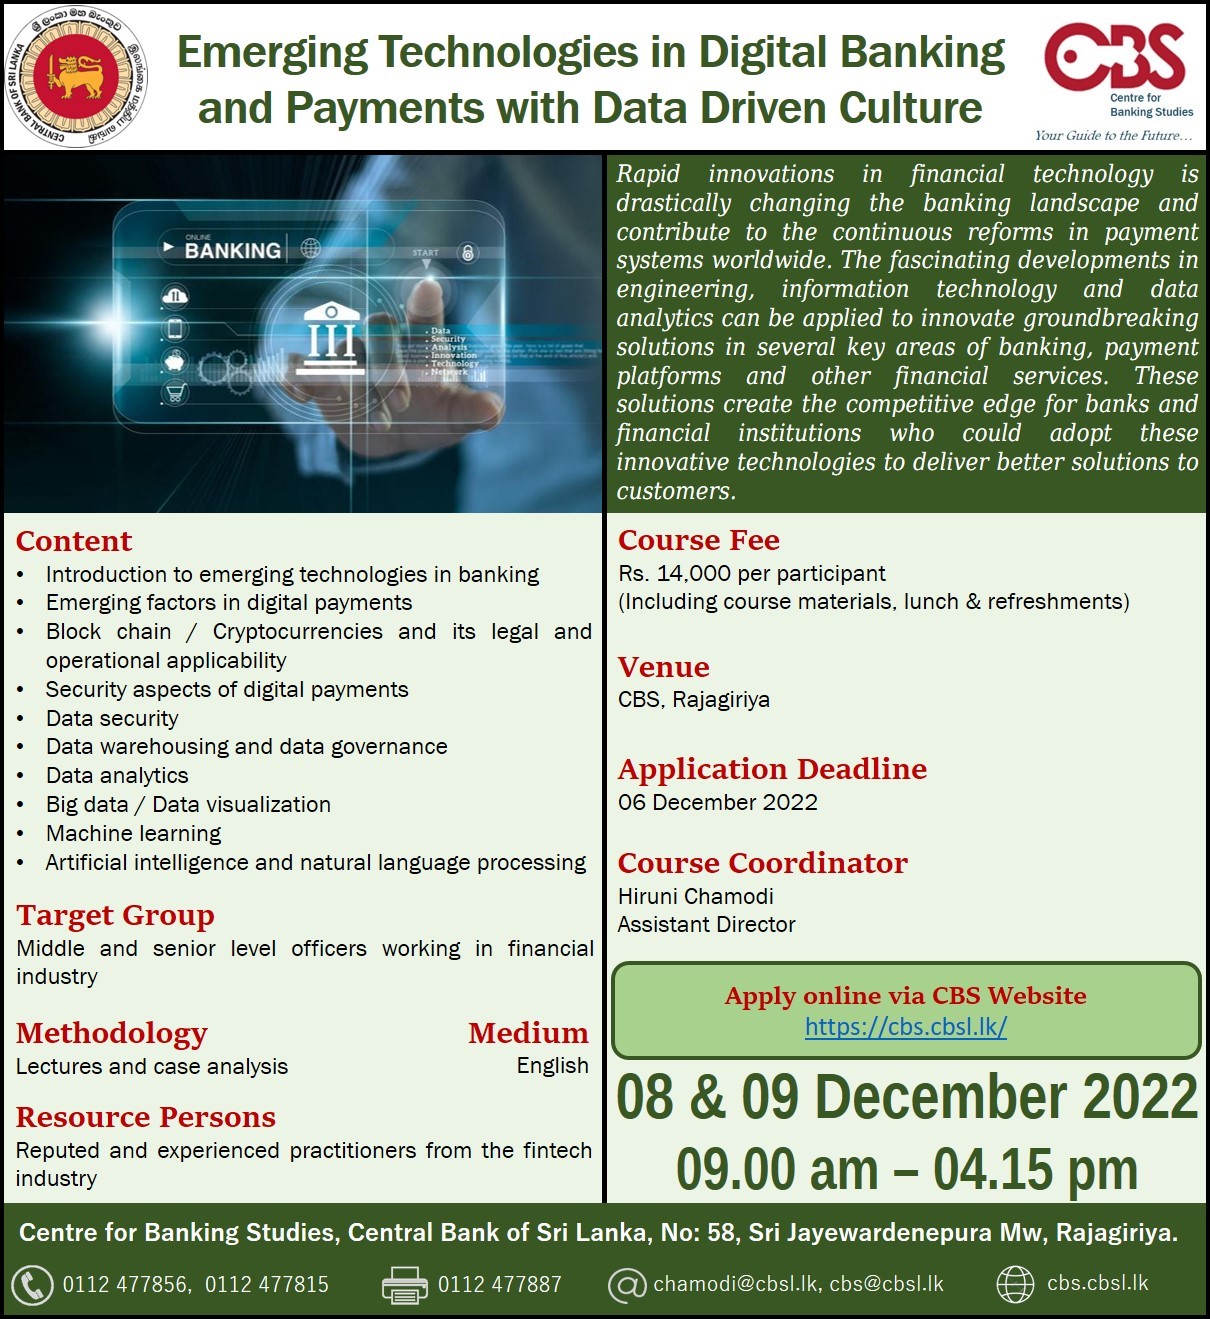 Emerging Technologies in Digital Banking and Payments with Data Driven Culture